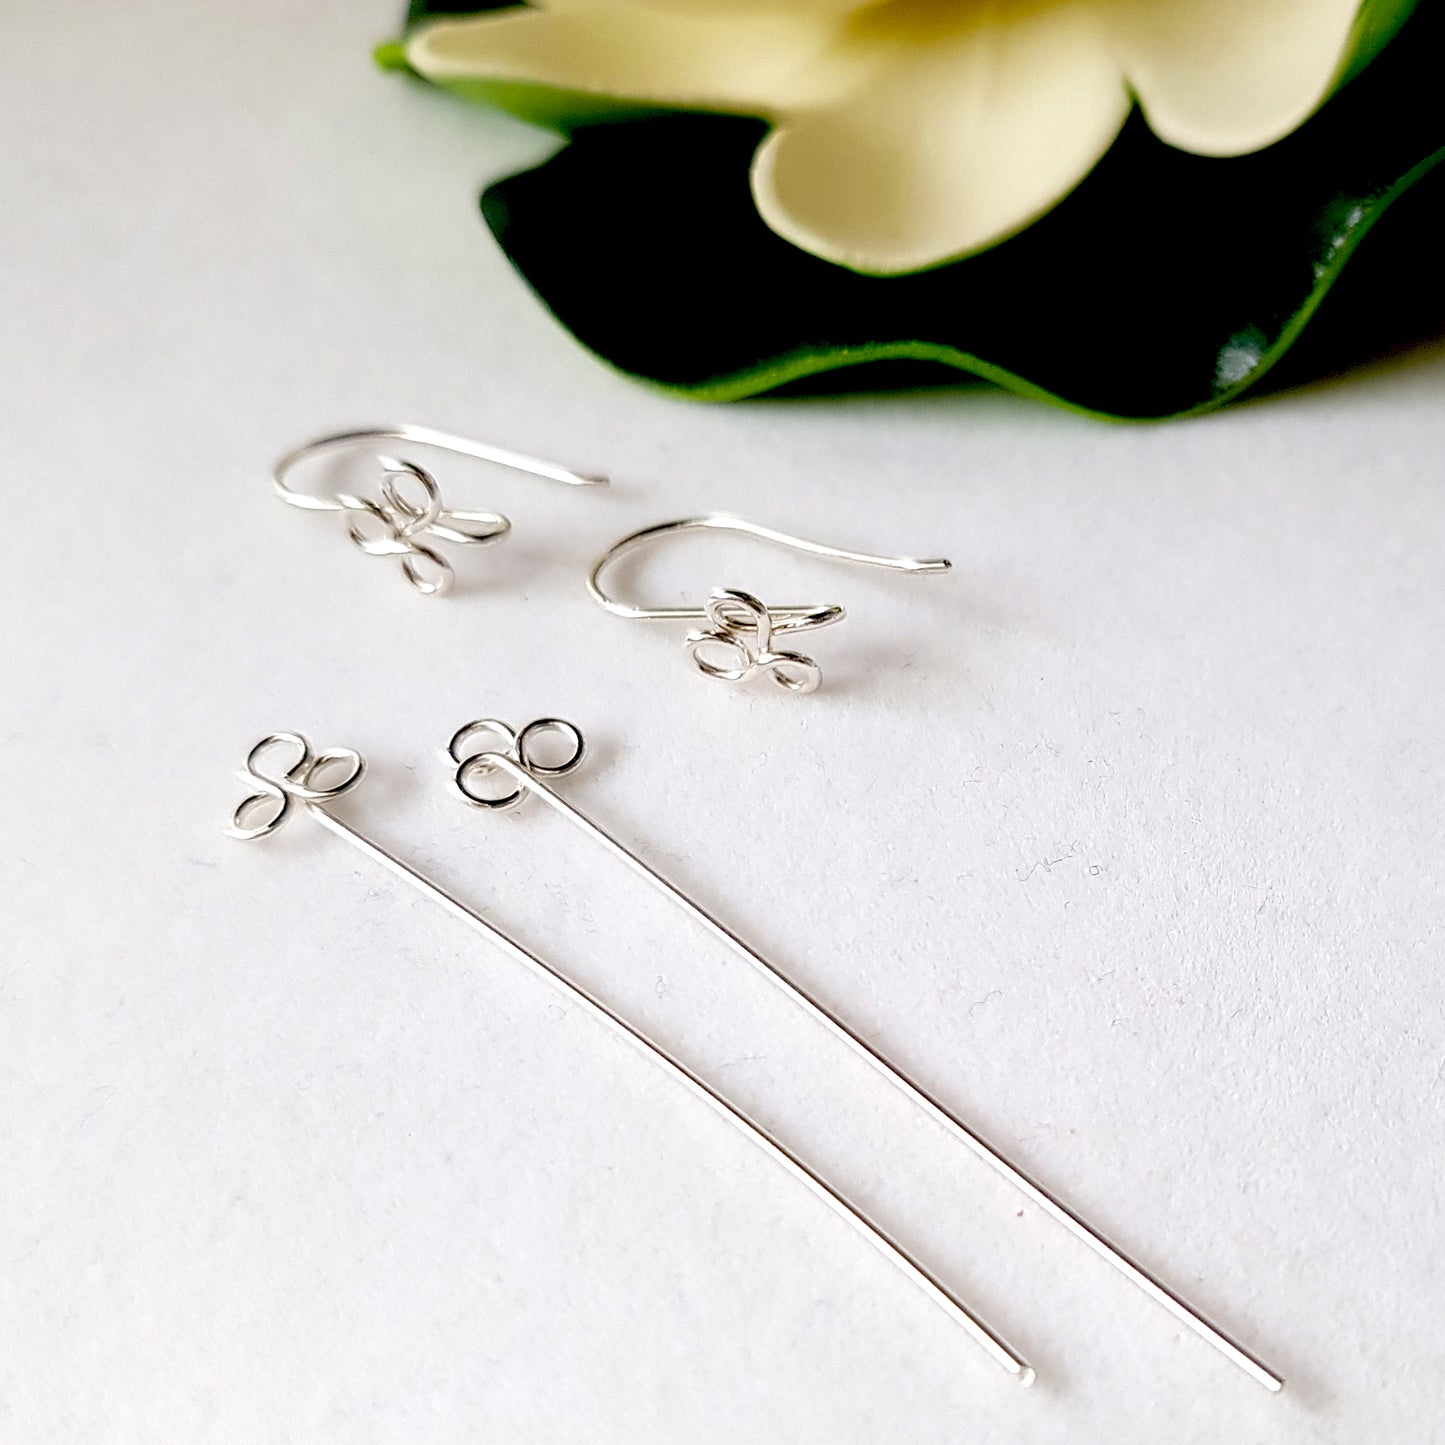 Ear Hook & Headpin Set [10 Pairs] Fancy Clover Solid Sterling Silver | SS-029cEHset | Earring Making Supply